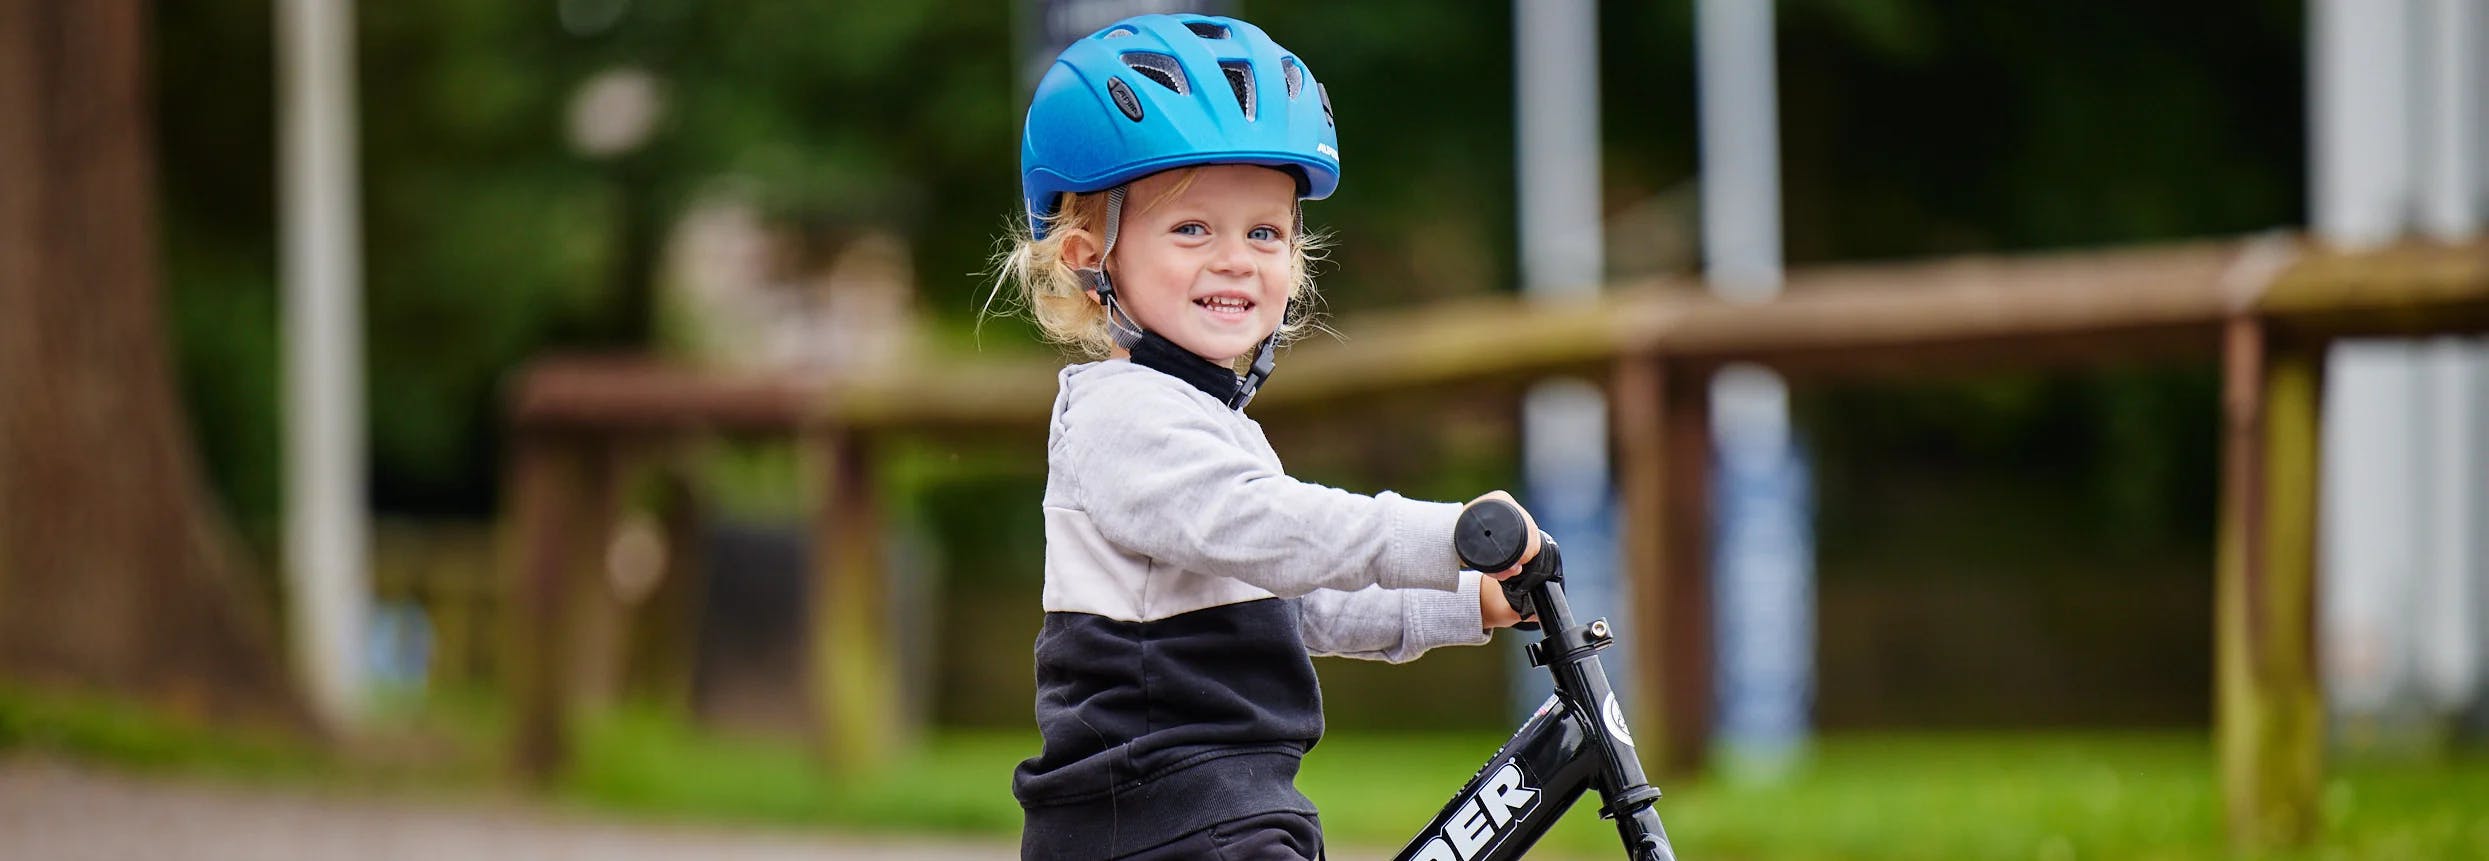 Explore our Range of Kids Balance Bikes collection header image